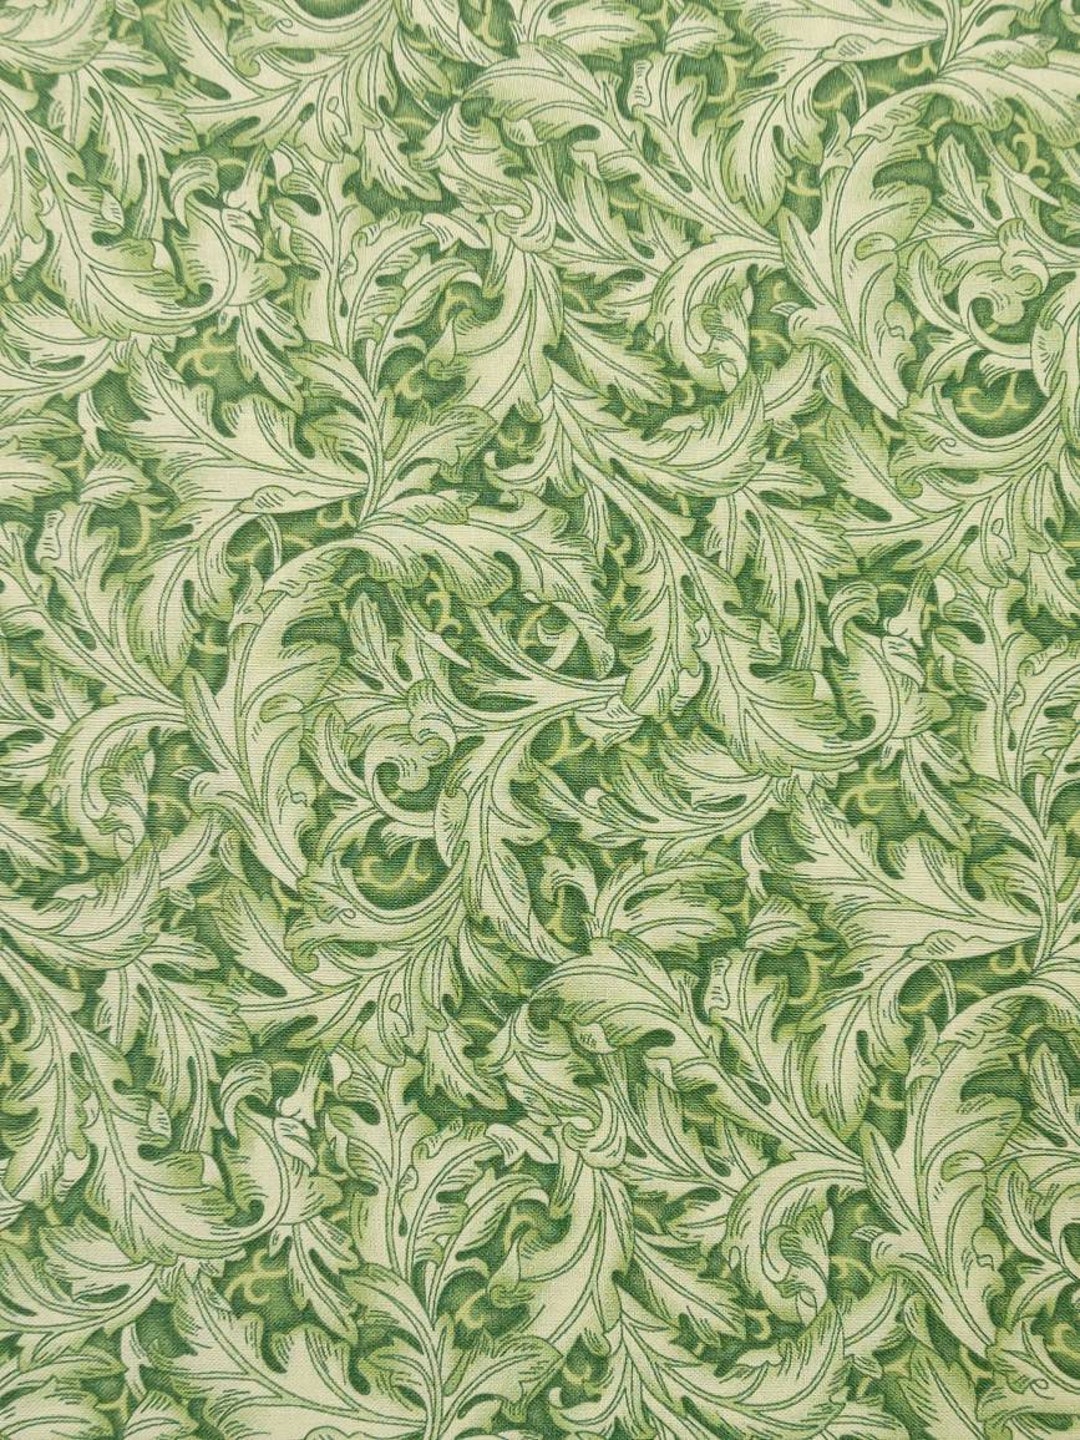 Fancy Leaves Green & White Quilting Cotton Fabric Bellisima - Etsy